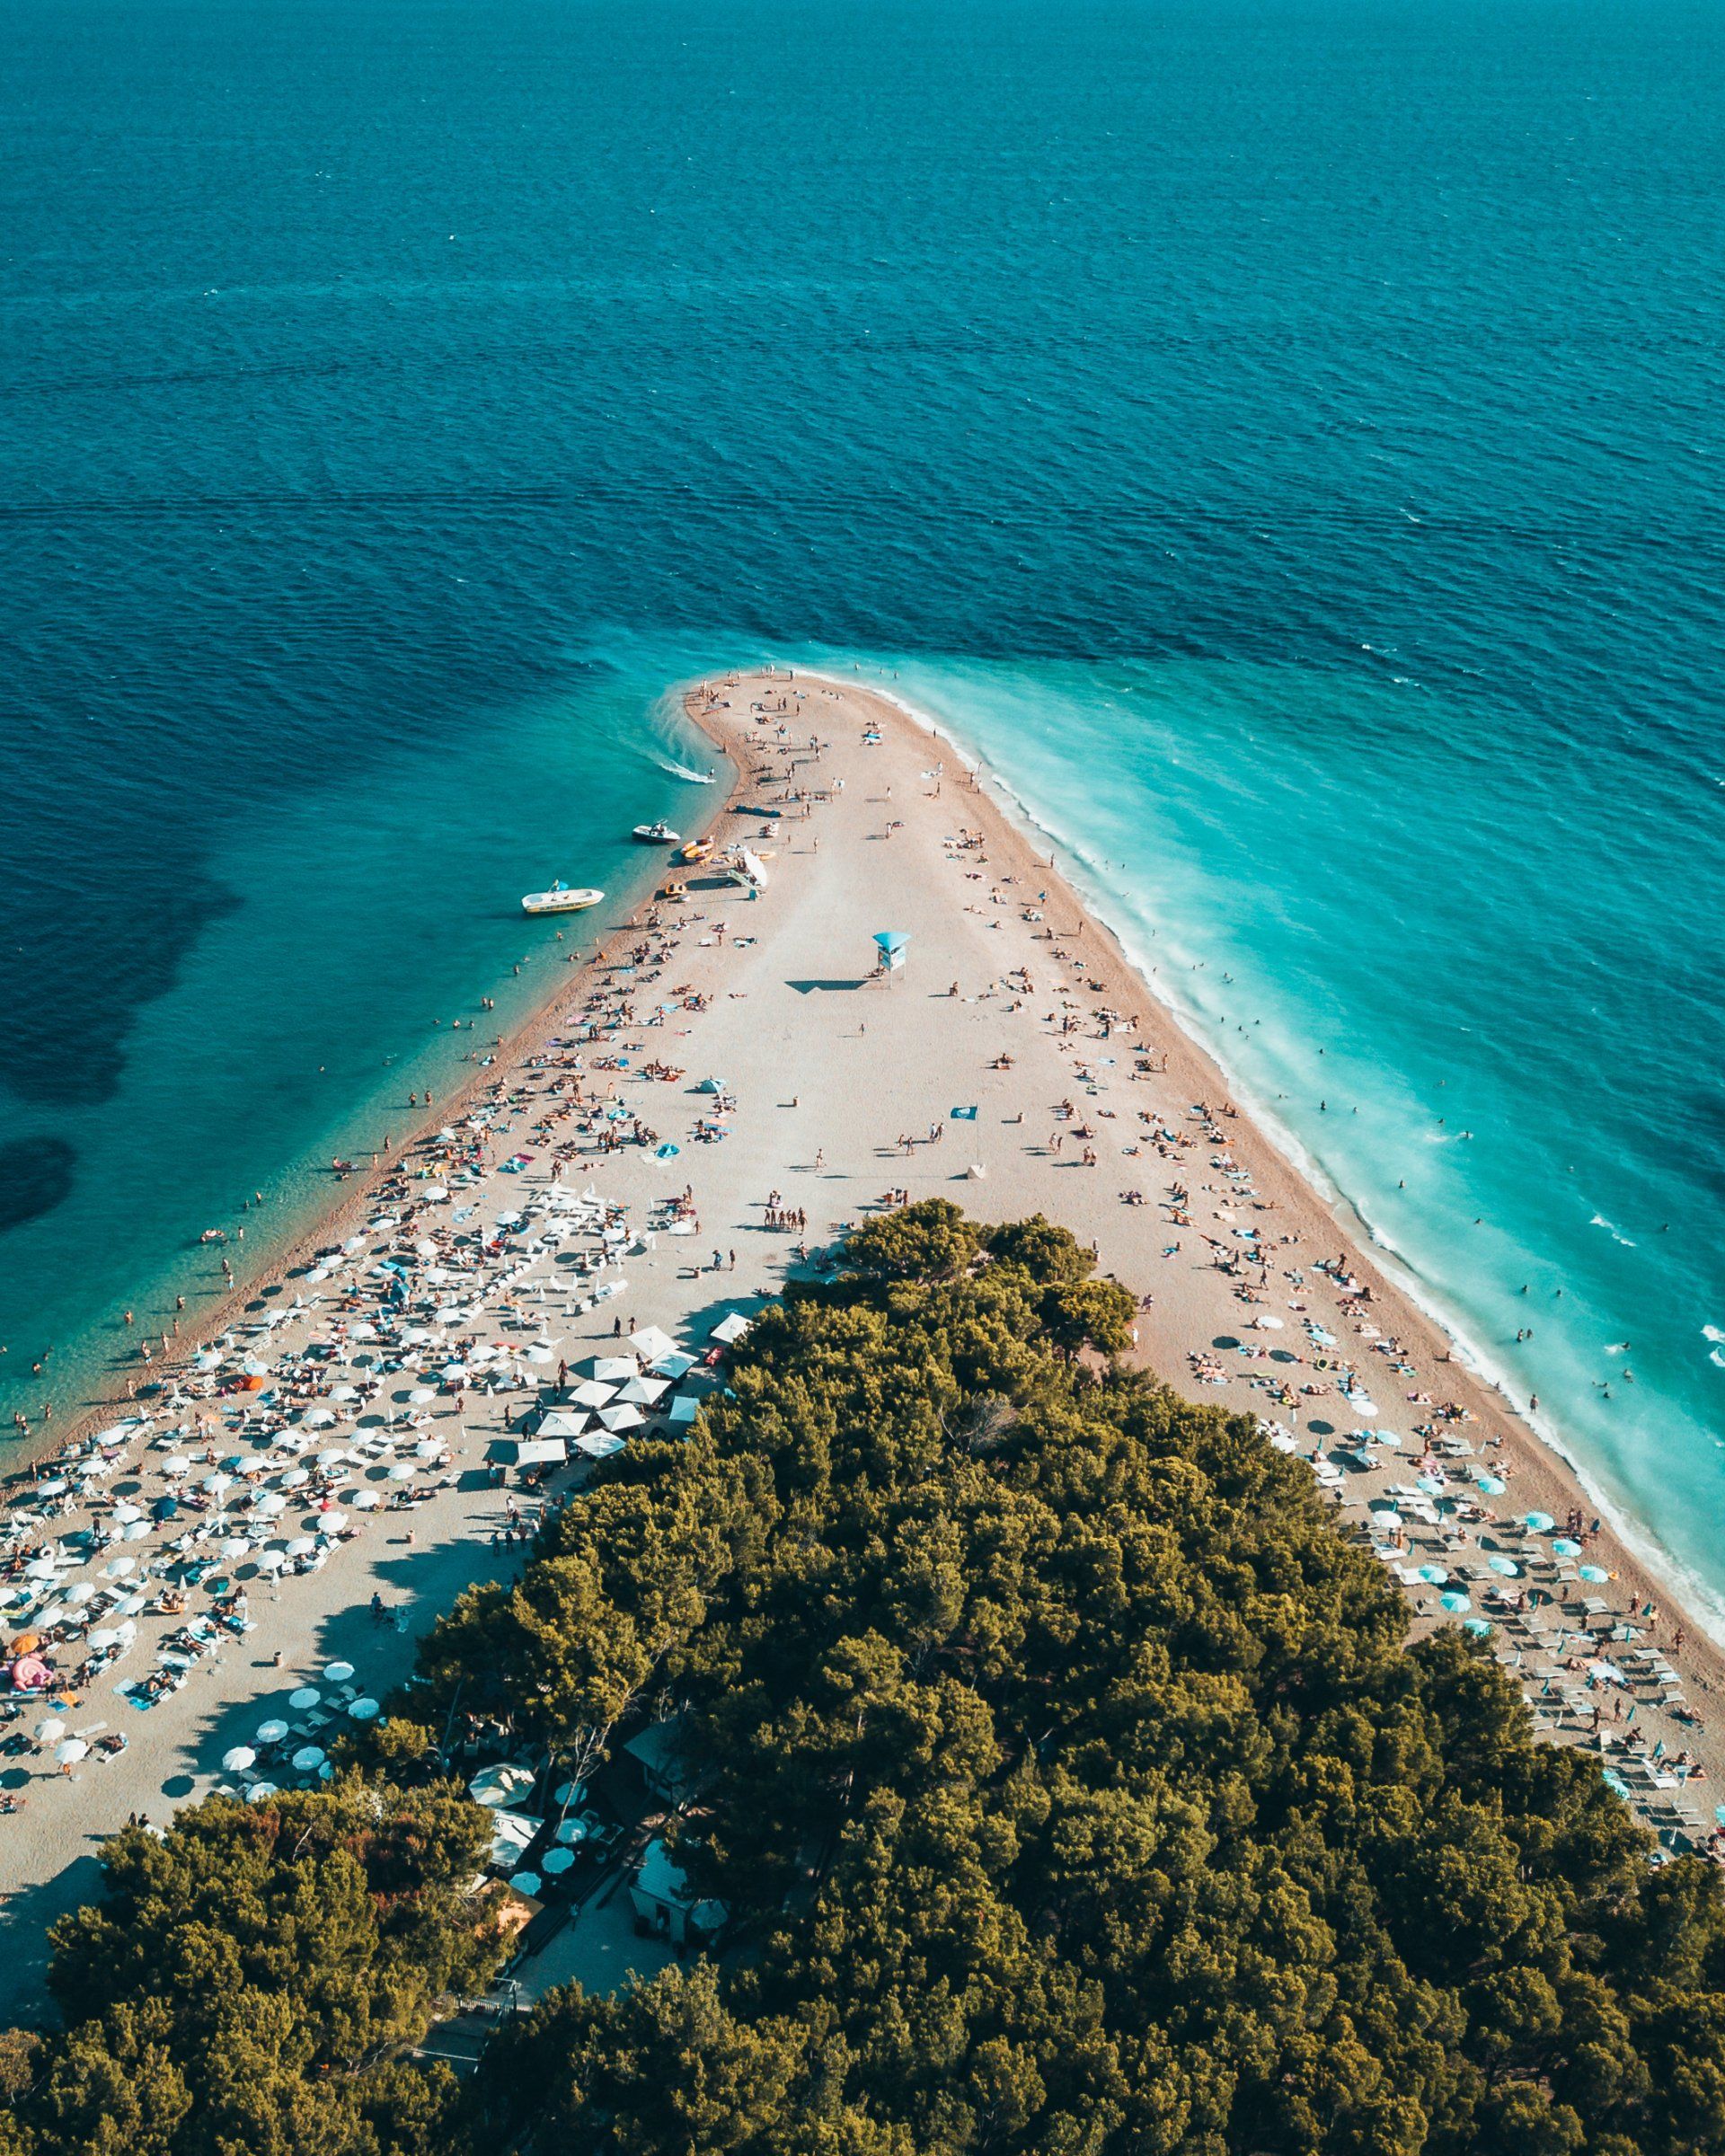 An aerial view of a crowded beach surrounded by trees.